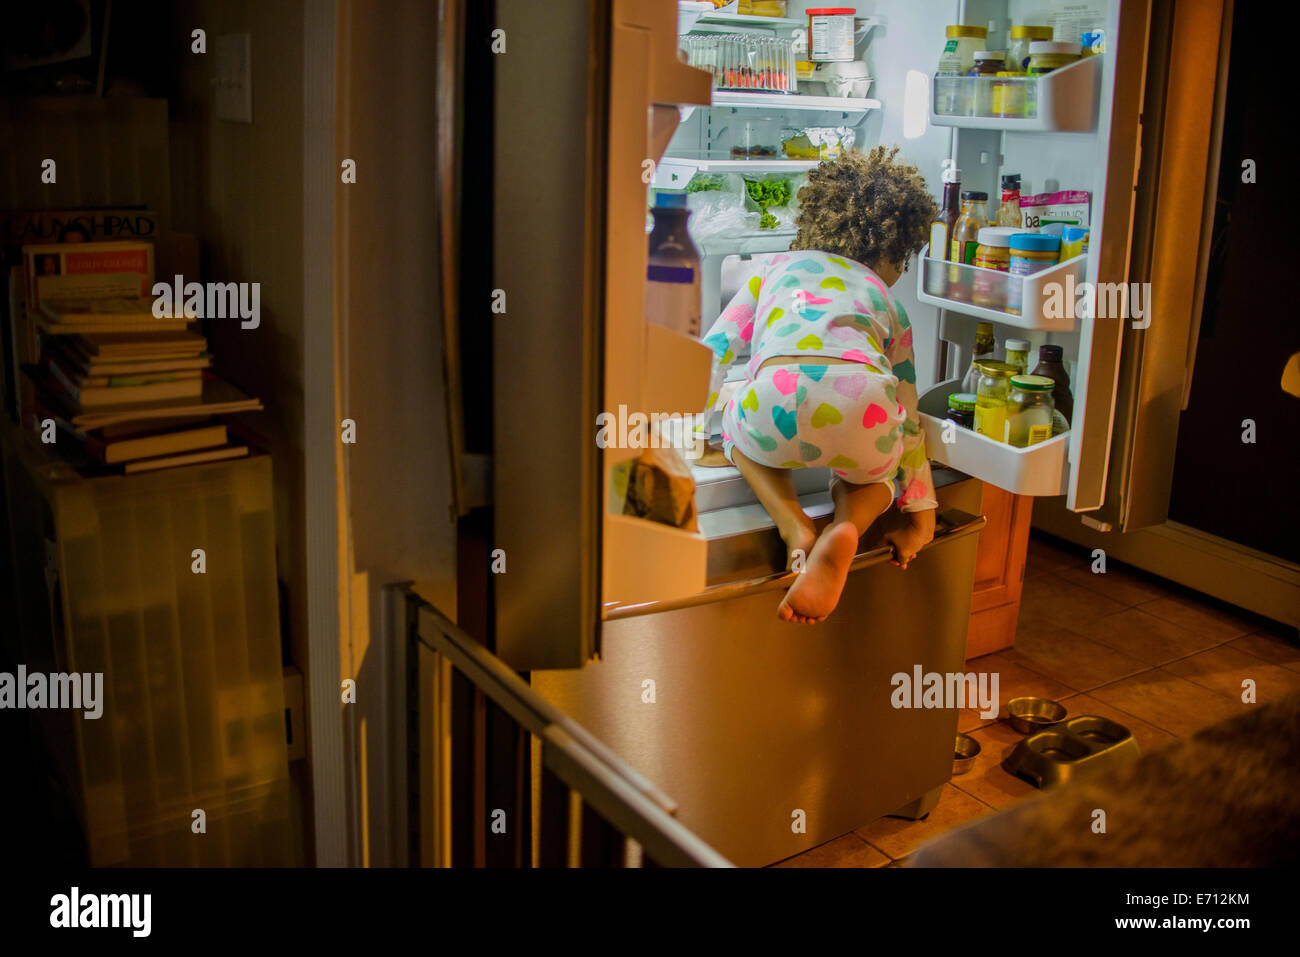 Rear view of girl sneaking food and drink from the refrigerator at night Stock Photo